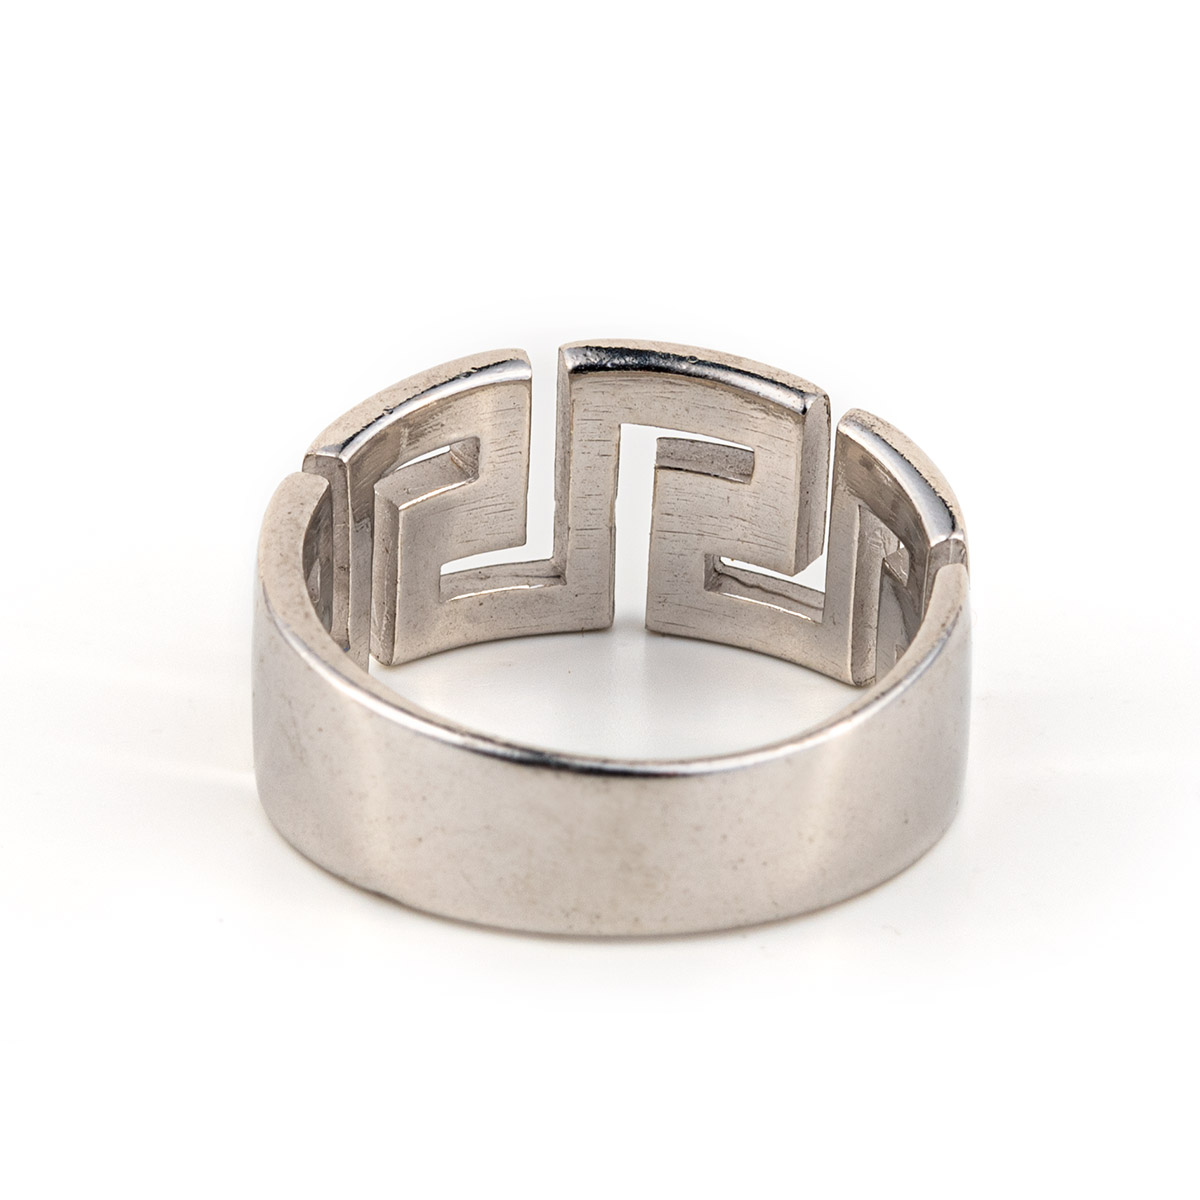 Meandros Ring in Sterling Silver - GREEK ROOTS Greek Jewelry